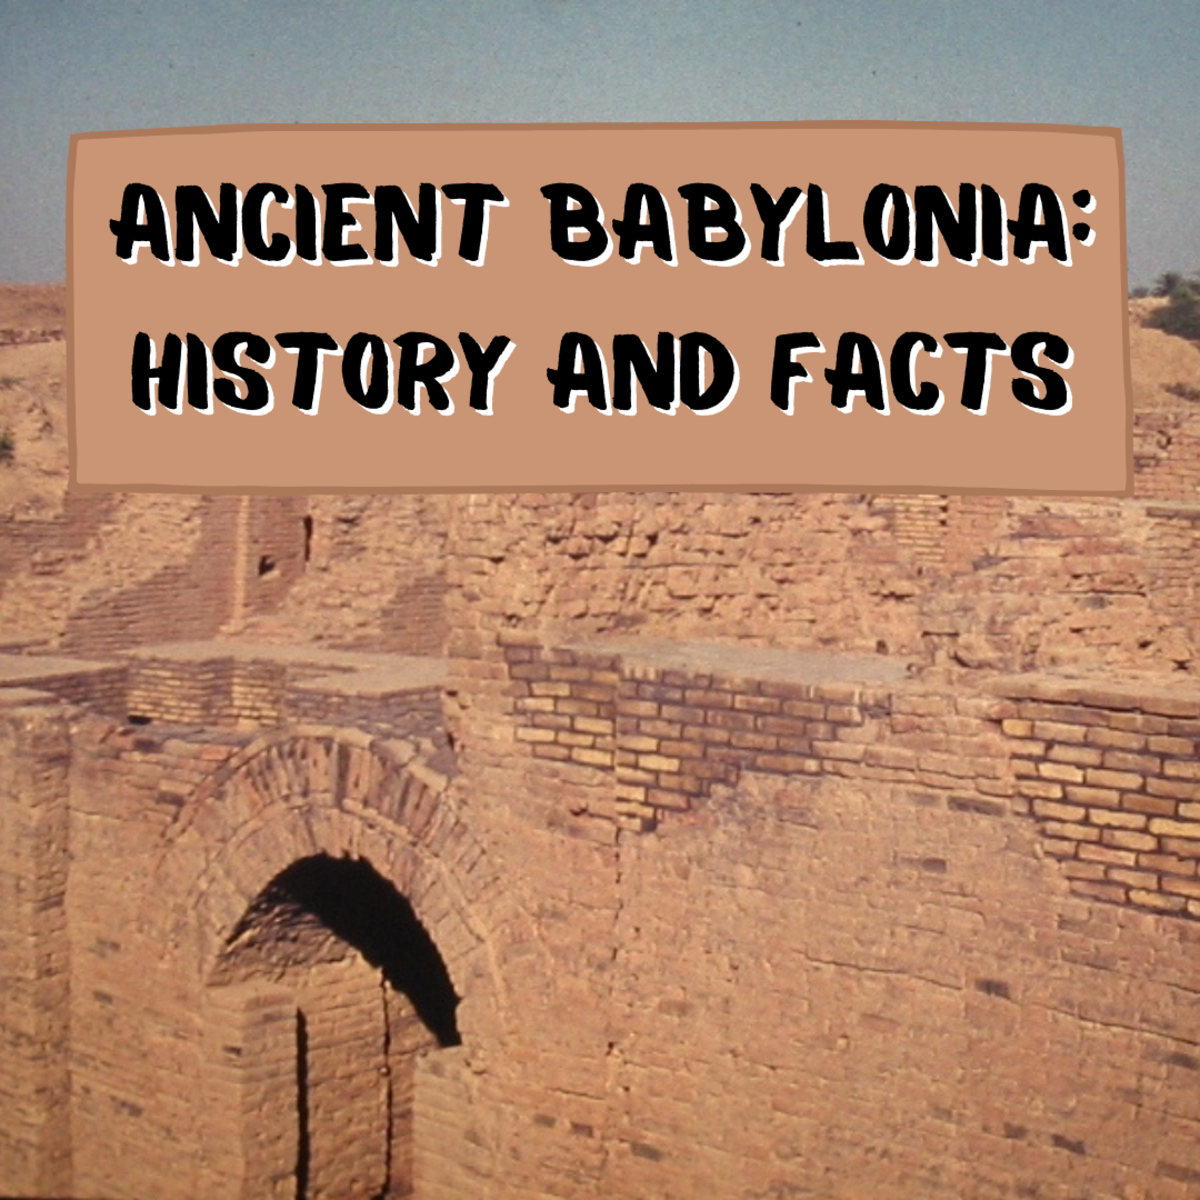 The Rise and Fall of Ancient Babylon